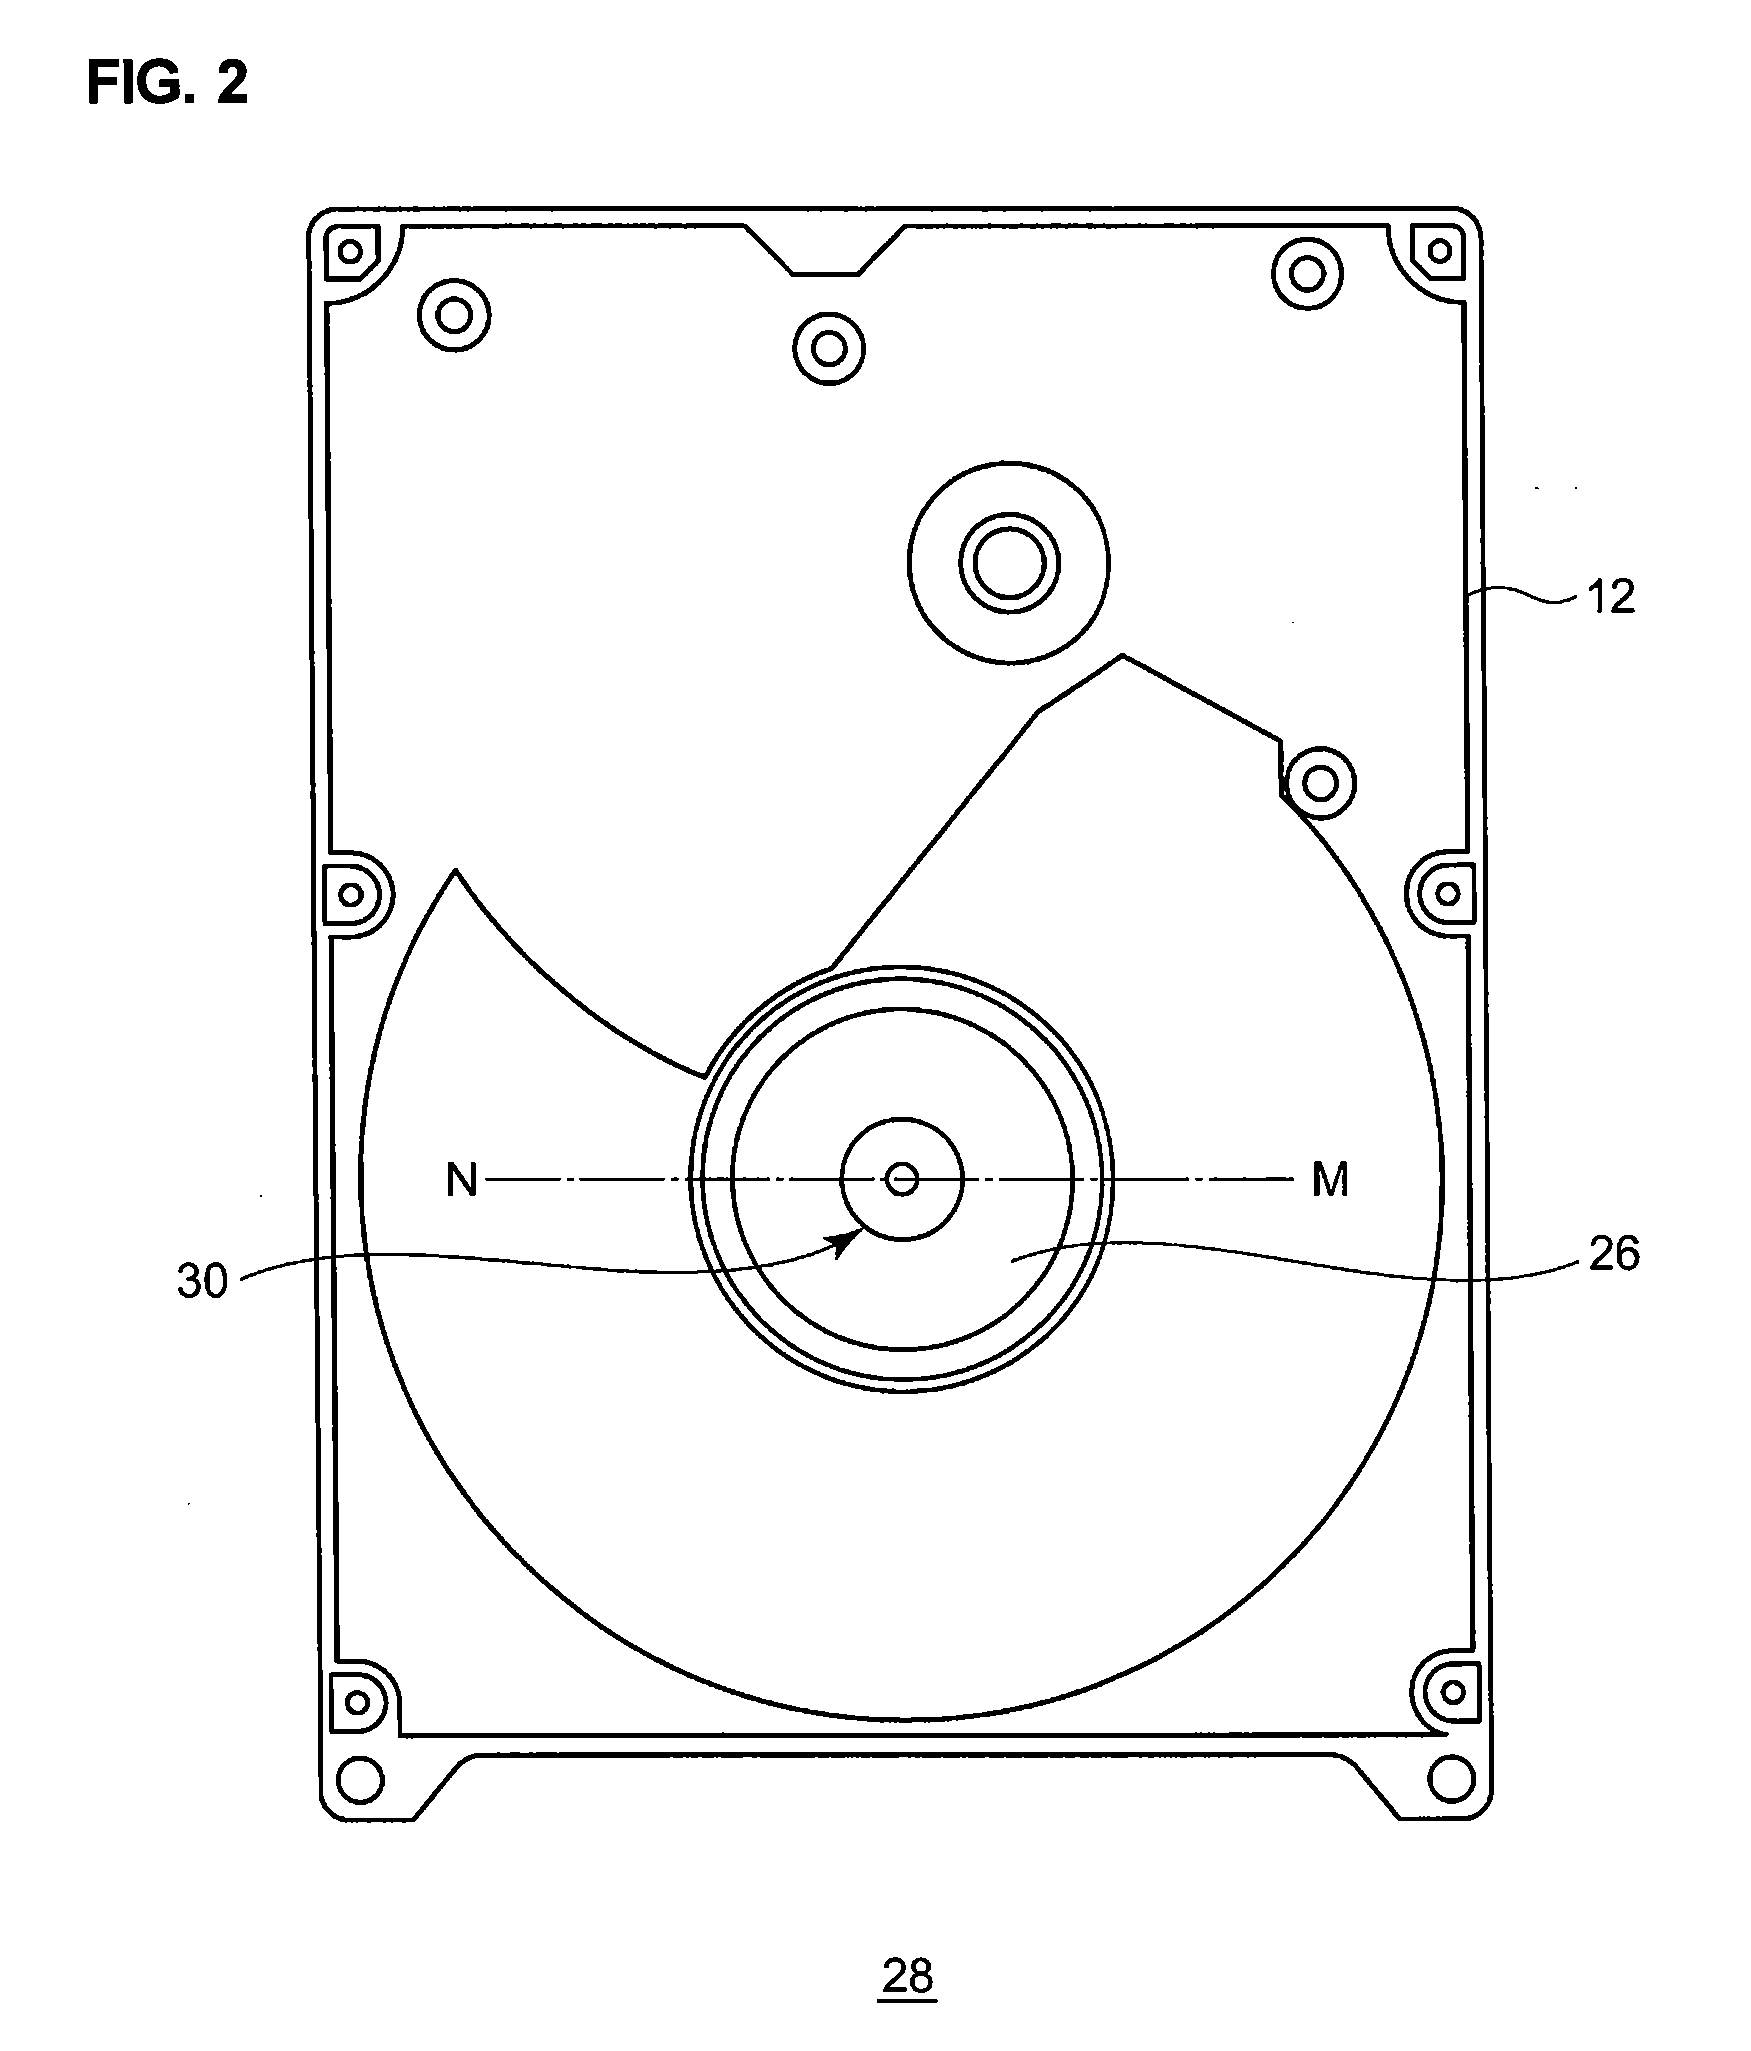 Method of manufacturing a disk drive device having base member, bearing unit, drive unit and hub, and disk drive device manufactured by the manufacturing method